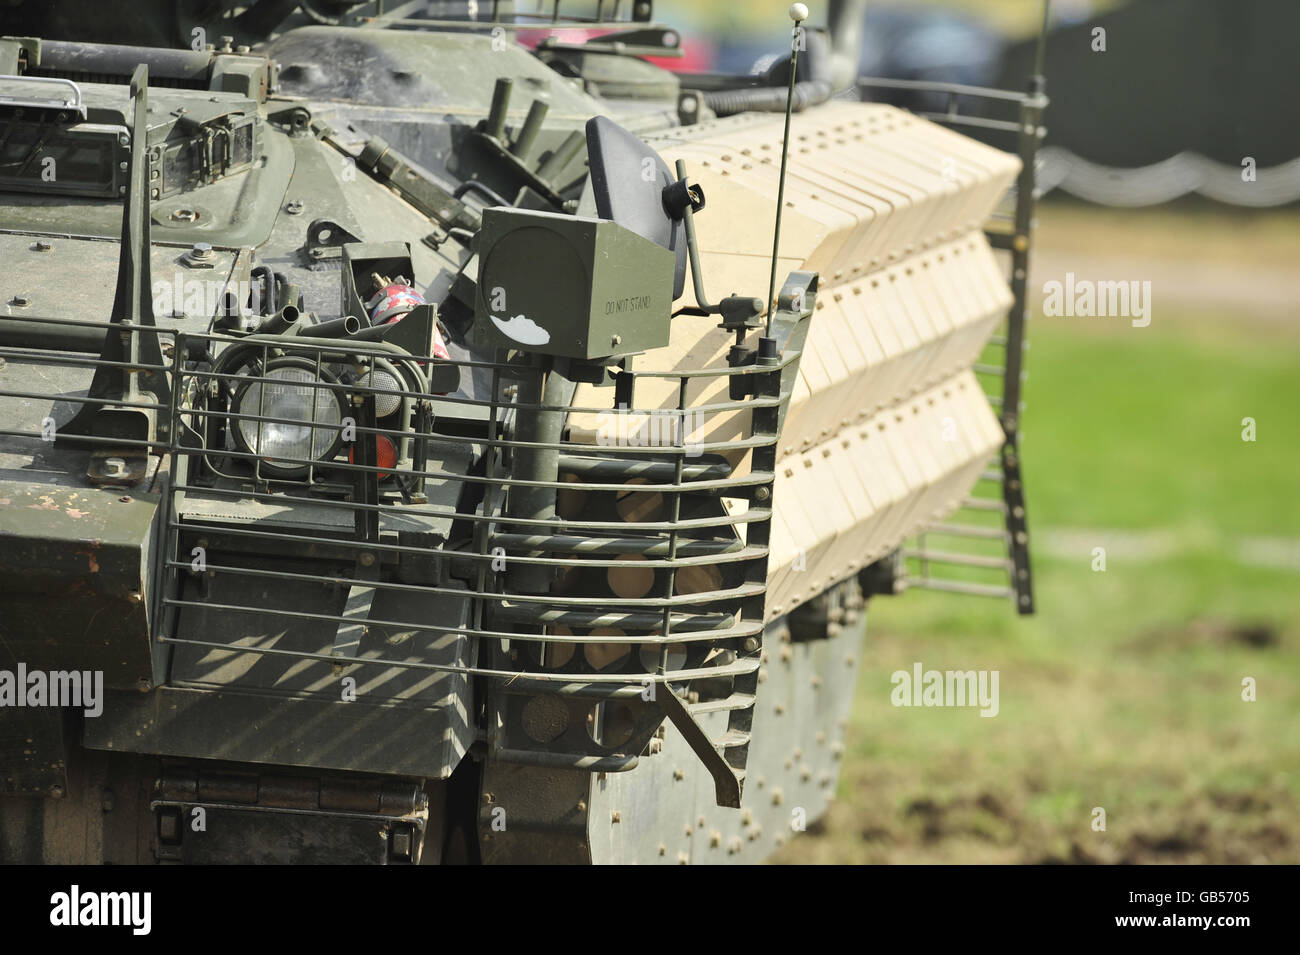 A Warrior tank with Enhanced Armour fitted in the form of heavy duty metal grids and sections that are covered in sheet steel causing anti-tank weapons to detonate further from the body of the vehicle and prevent full penetration through the vehicle's skin. The Army Urgent Operational Requirement (UOR) day, held at Salisbury Plain showcases new modifications to existing vehicles and equipment that is being sent out to warzones plus new mllitary equipment that is undergoing trials for possible issue to troops on operations. Stock Photo